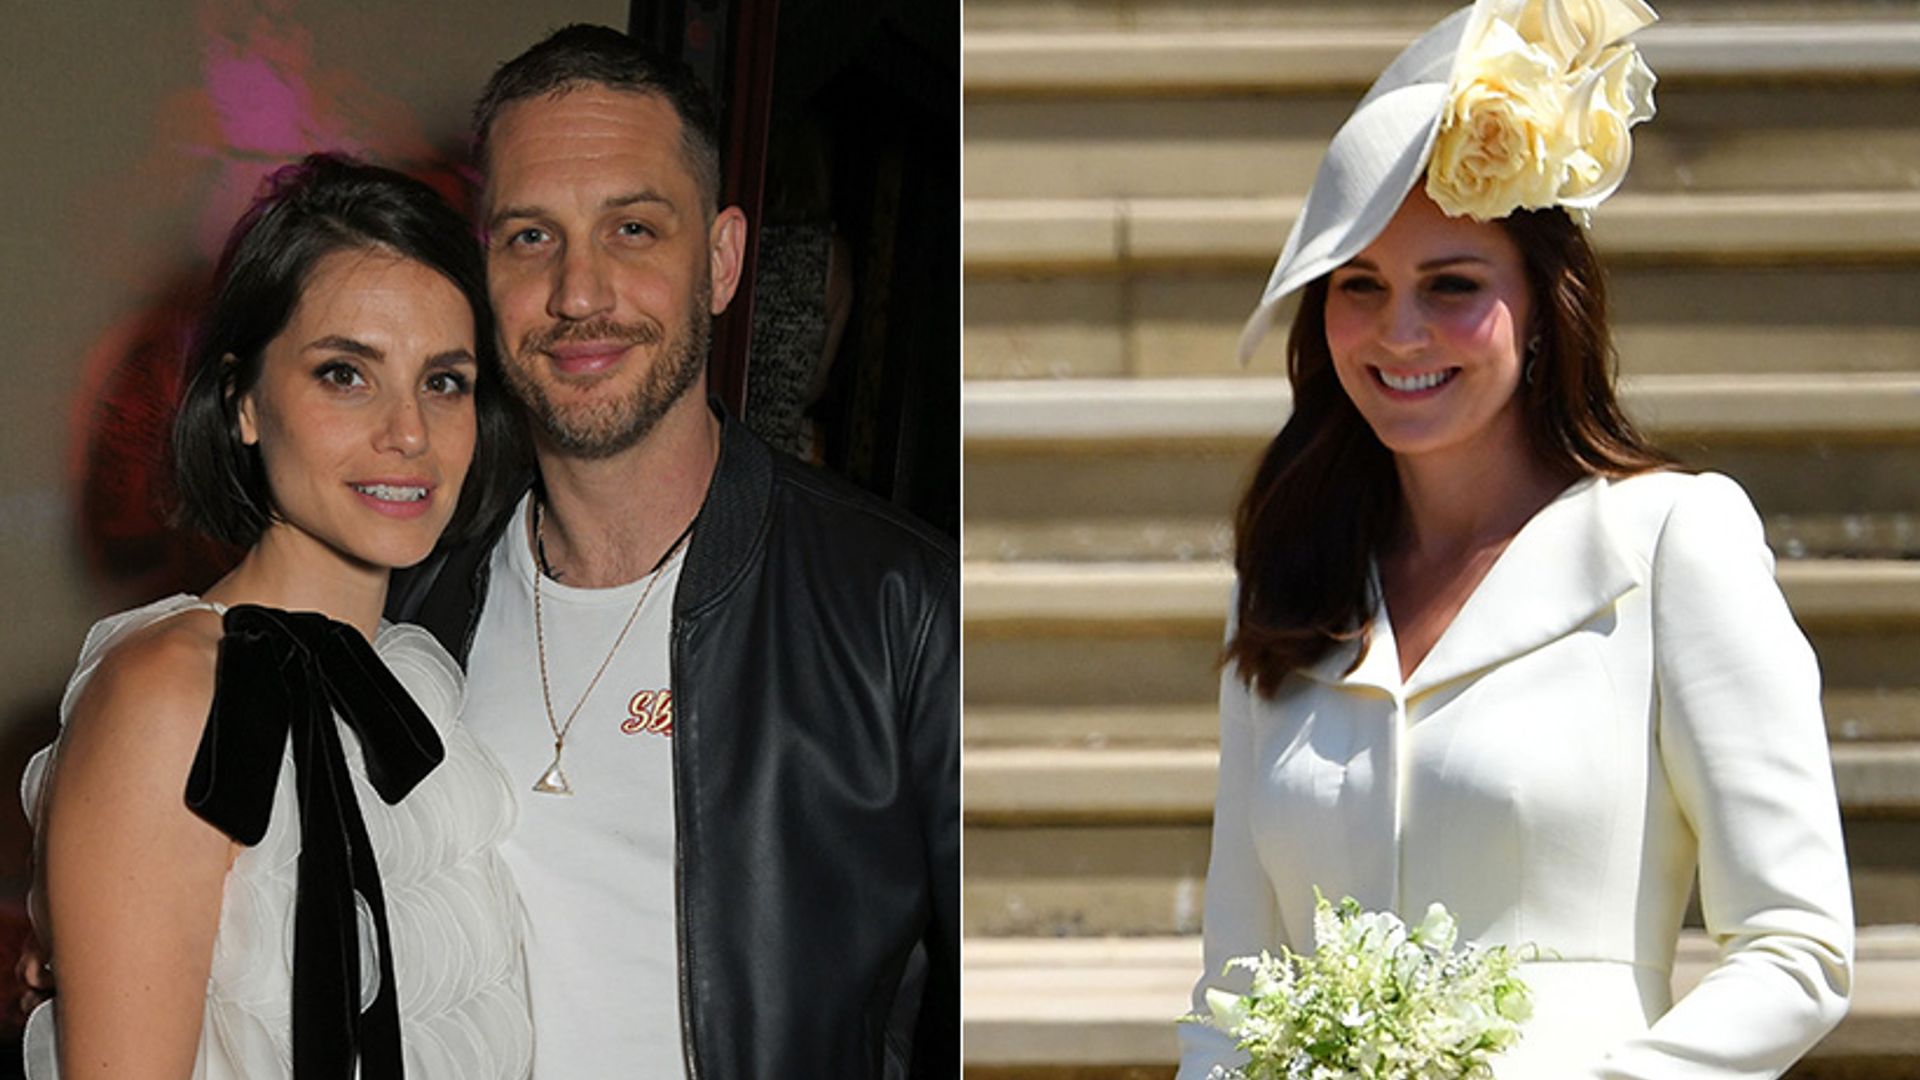 Tom Hardy's wife Charlotte Riley disappointed she didn't talk to Kate Middleton at royal wedding